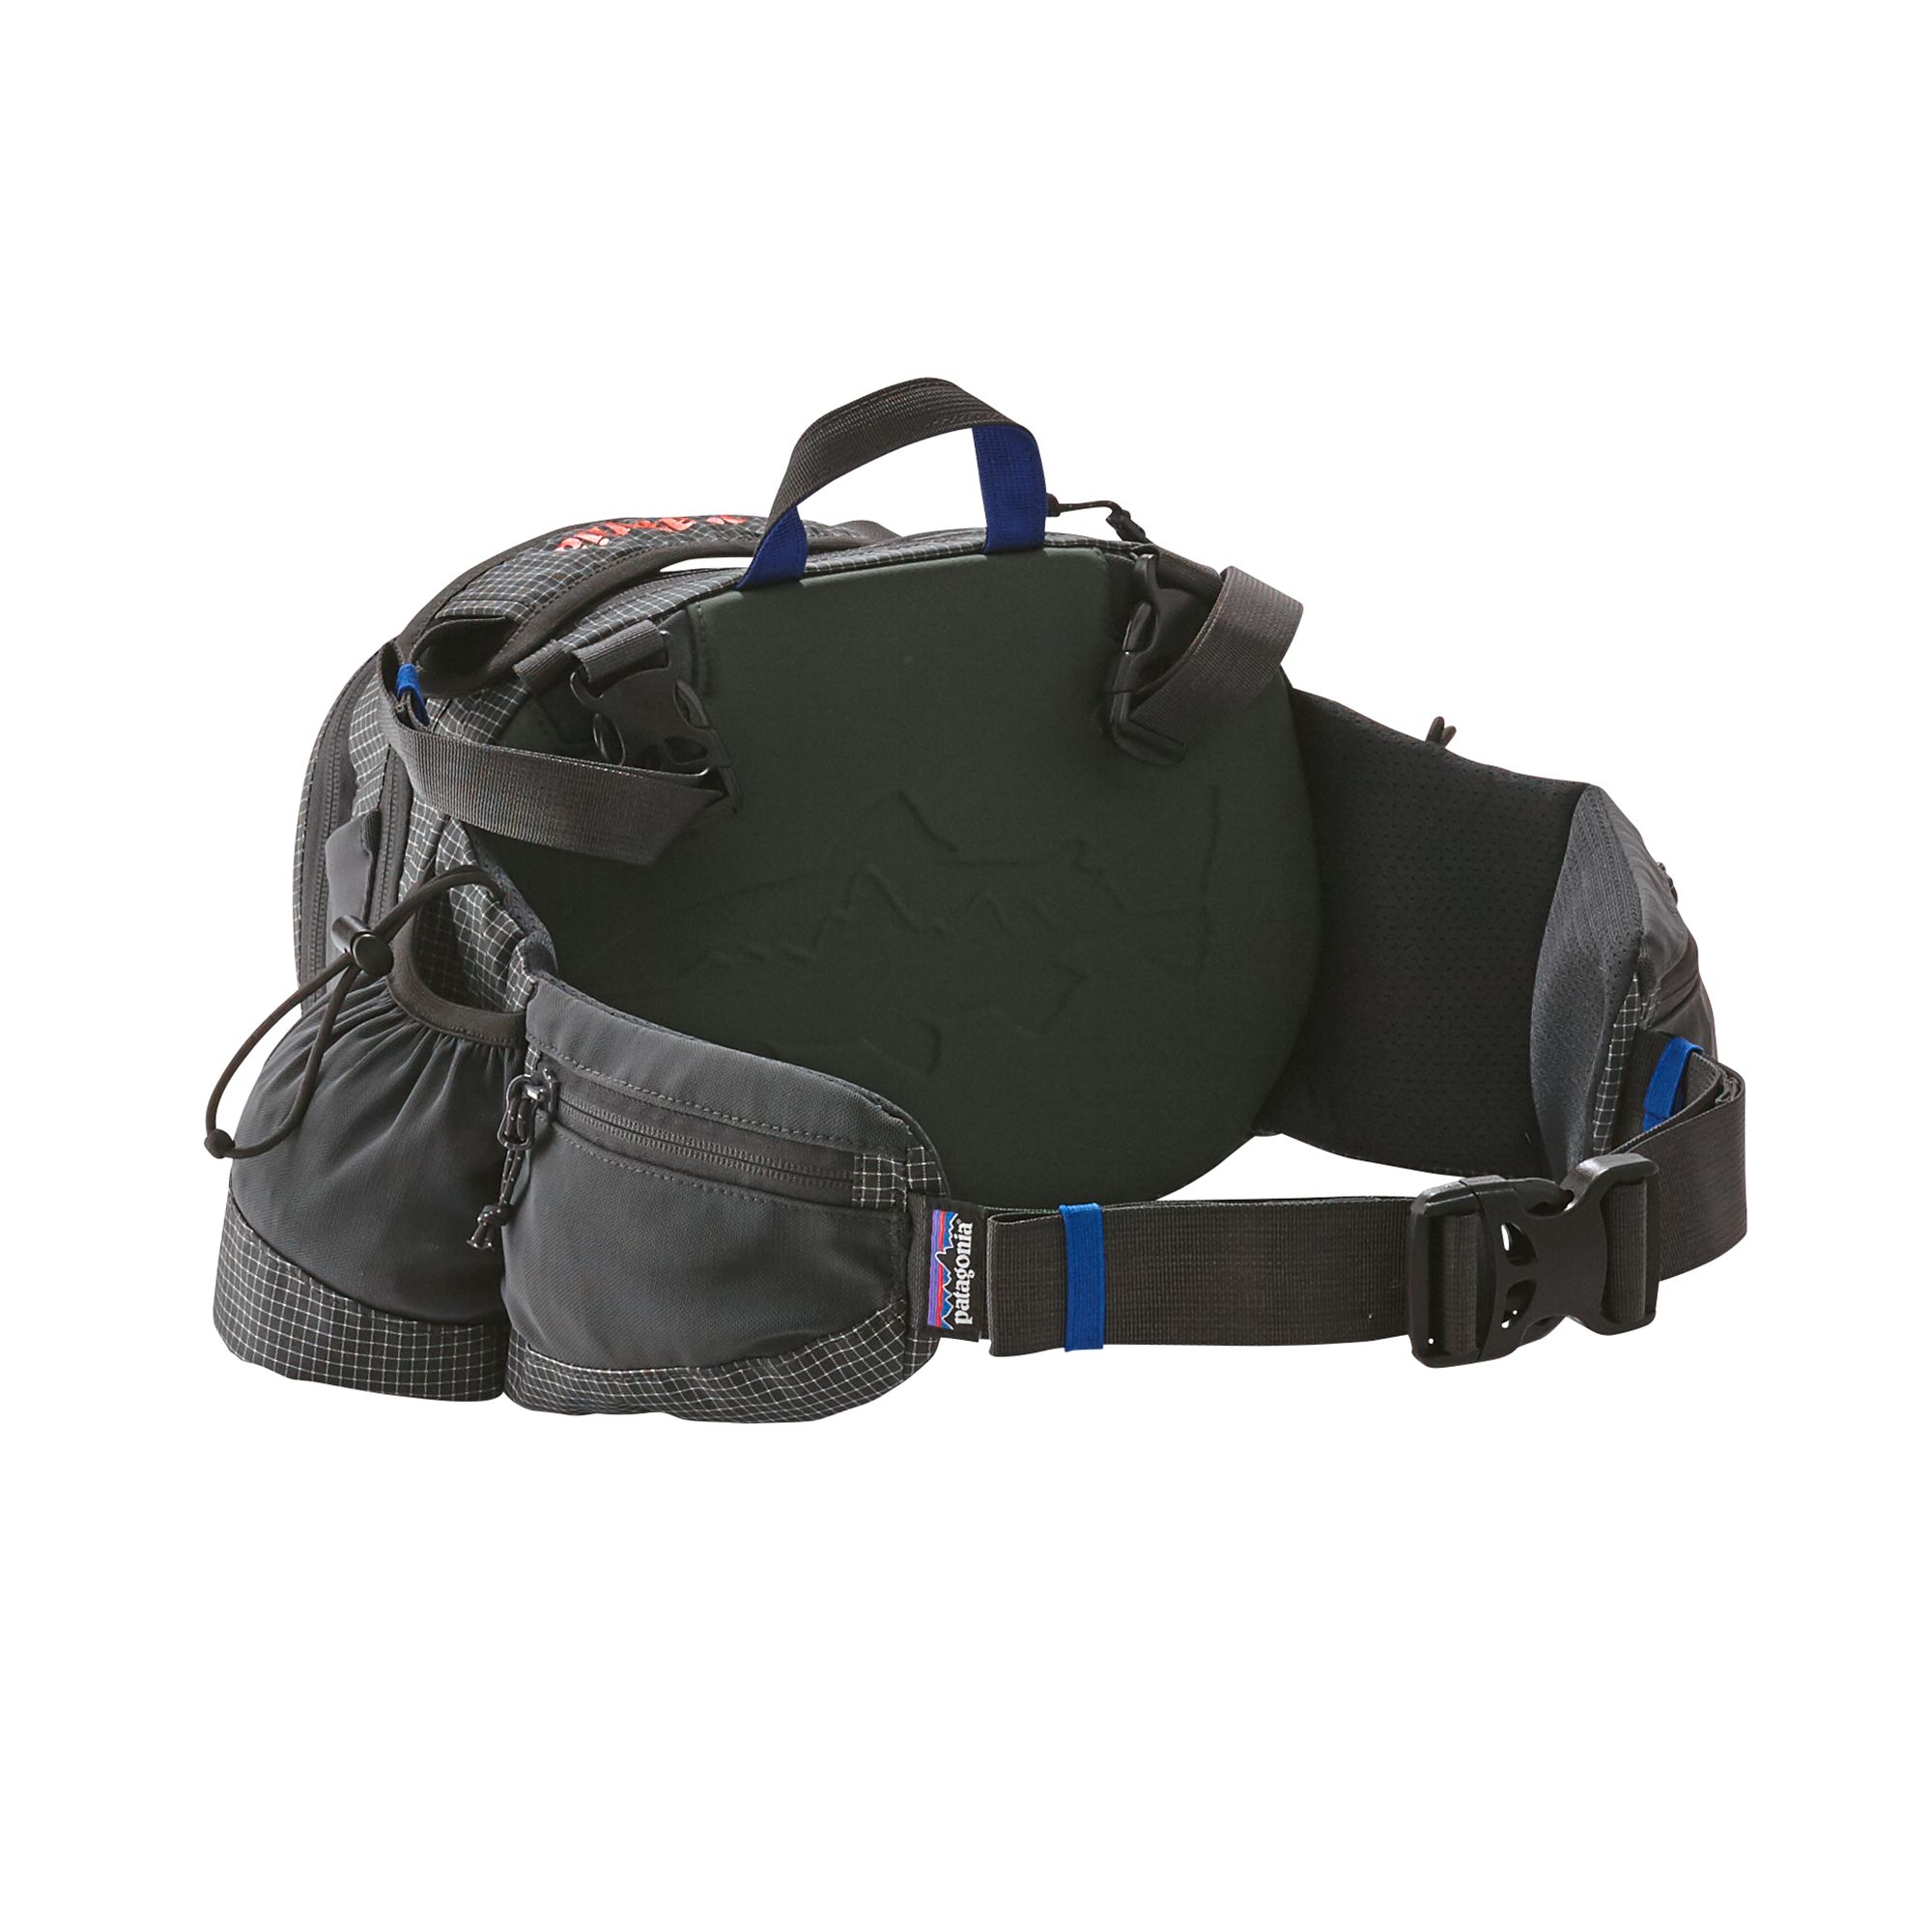 https://www.czechnymph.com/data/web/eshop/patagonia/bags-packs/stealth-hip-pack/stealth-hip-pack-back.jpg